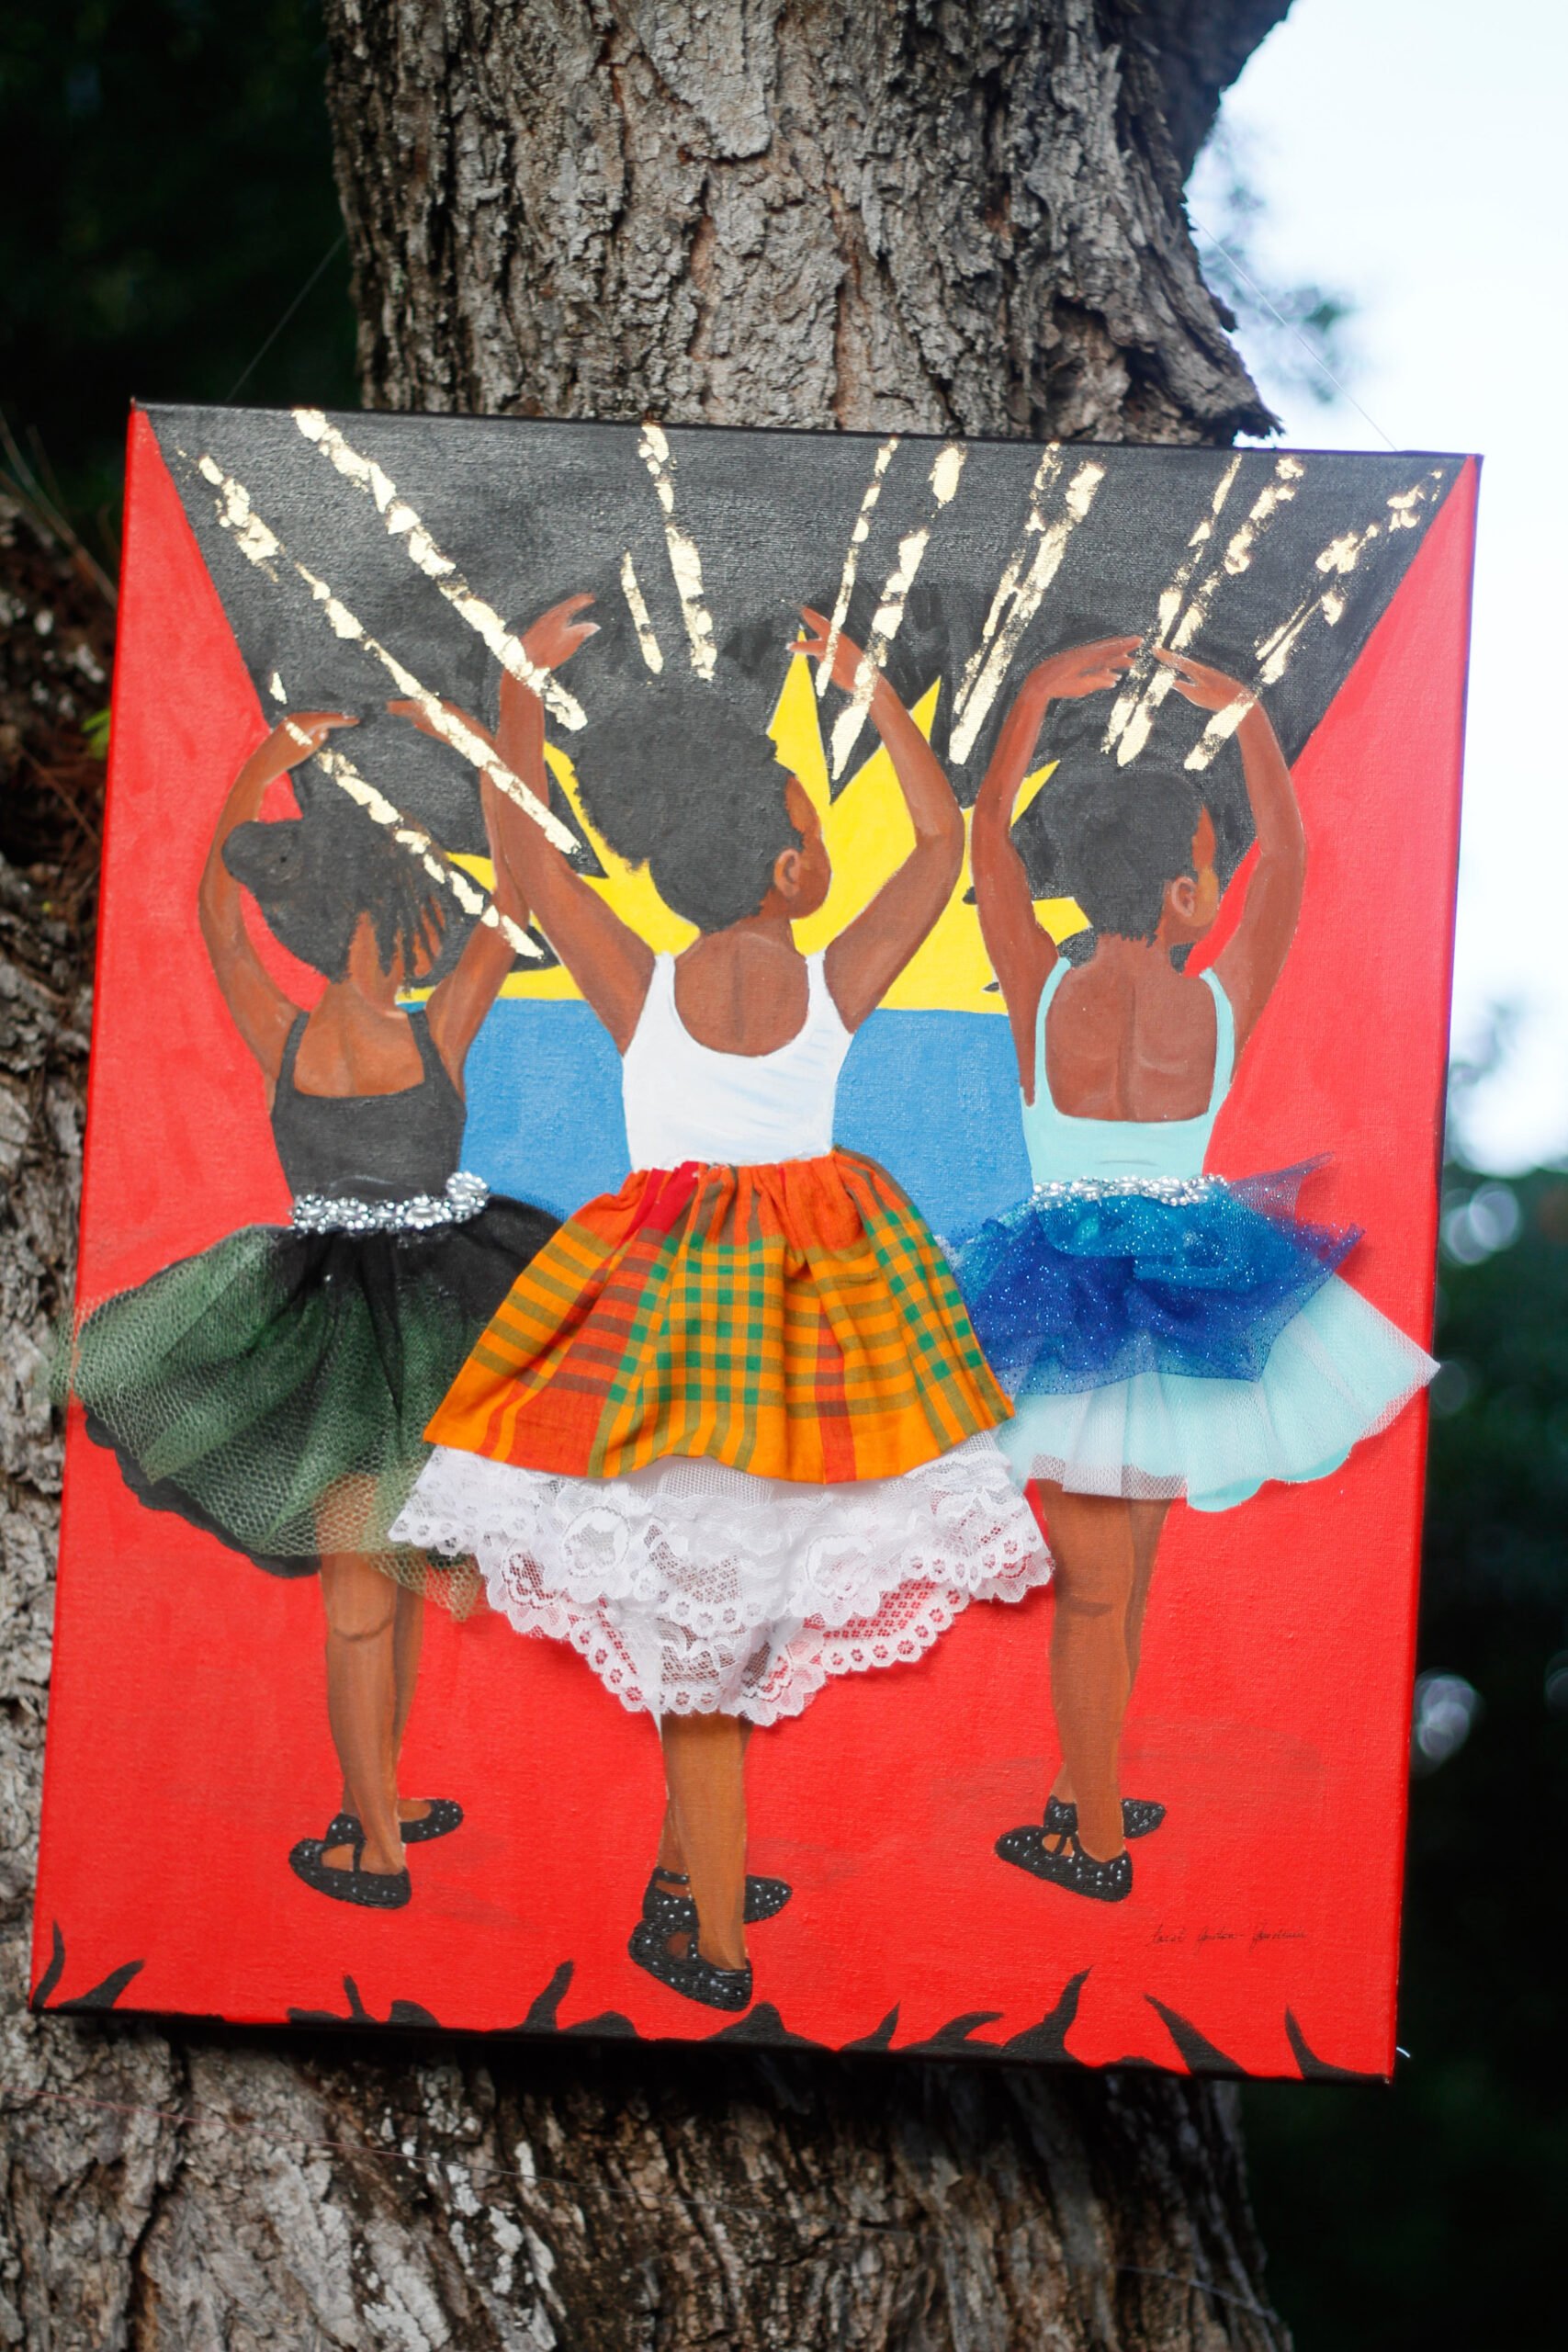 Antigua and Barbuda Art Week featured artist Carol Gordon-Goodwin’s painting of young dancers in Antigua and Barbuda